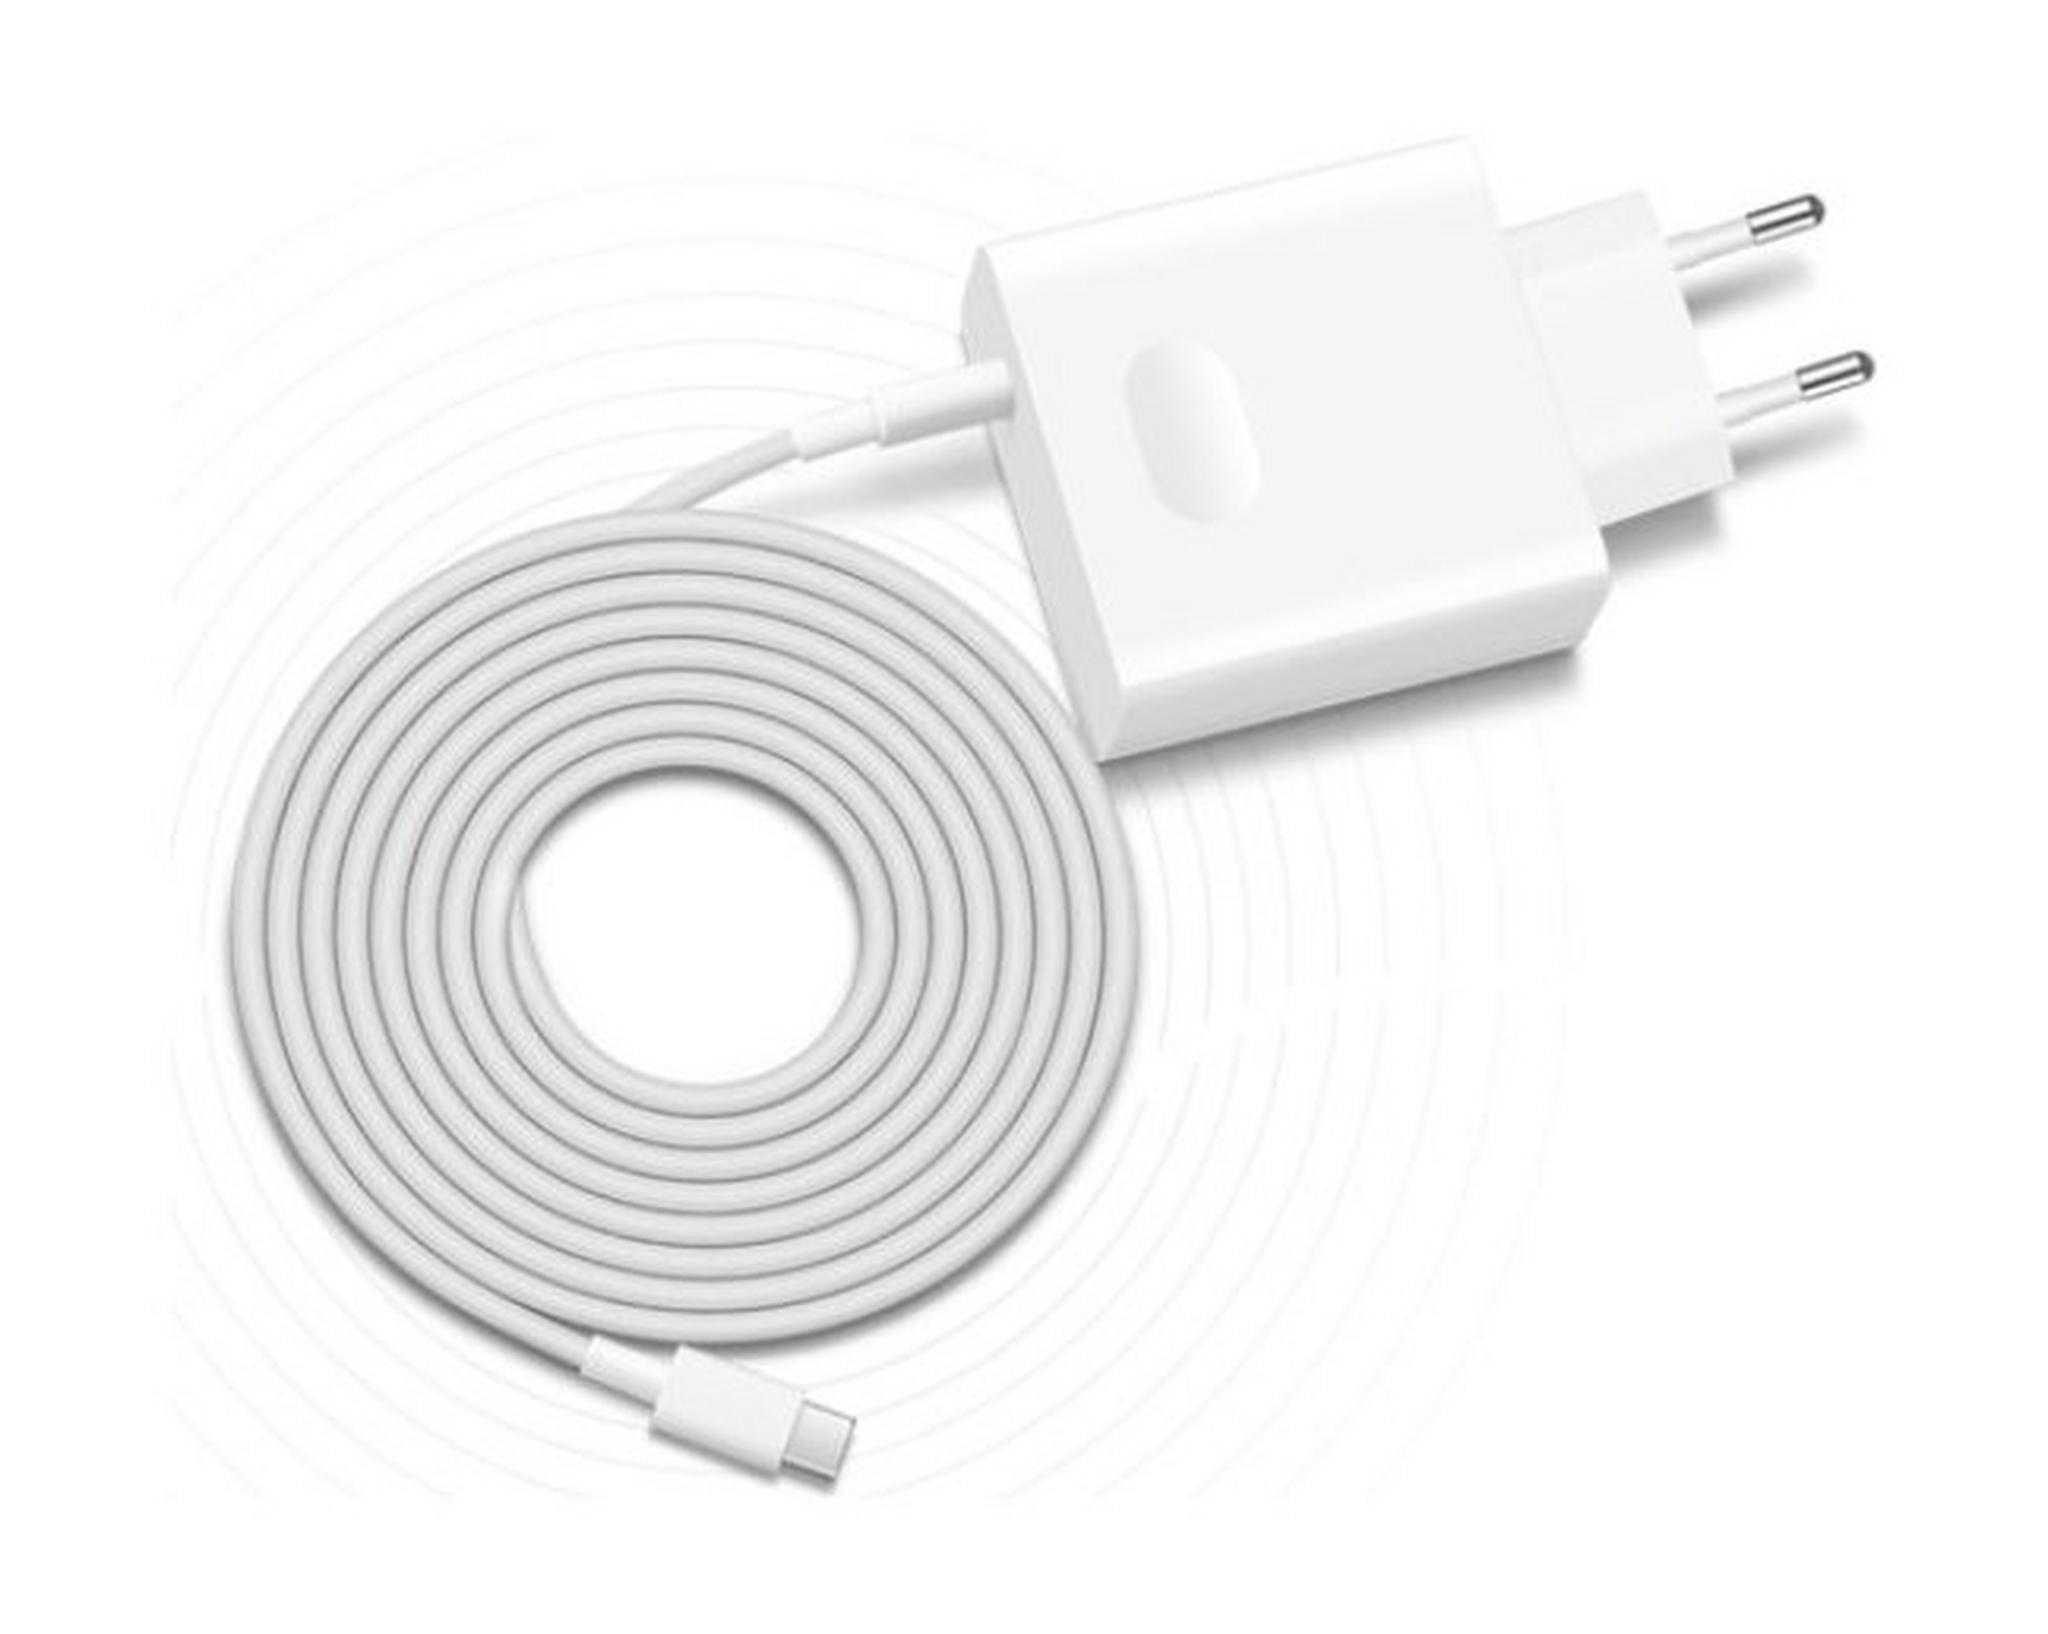 Huawei Fast Charge USB-C Adapter (55030274) - White